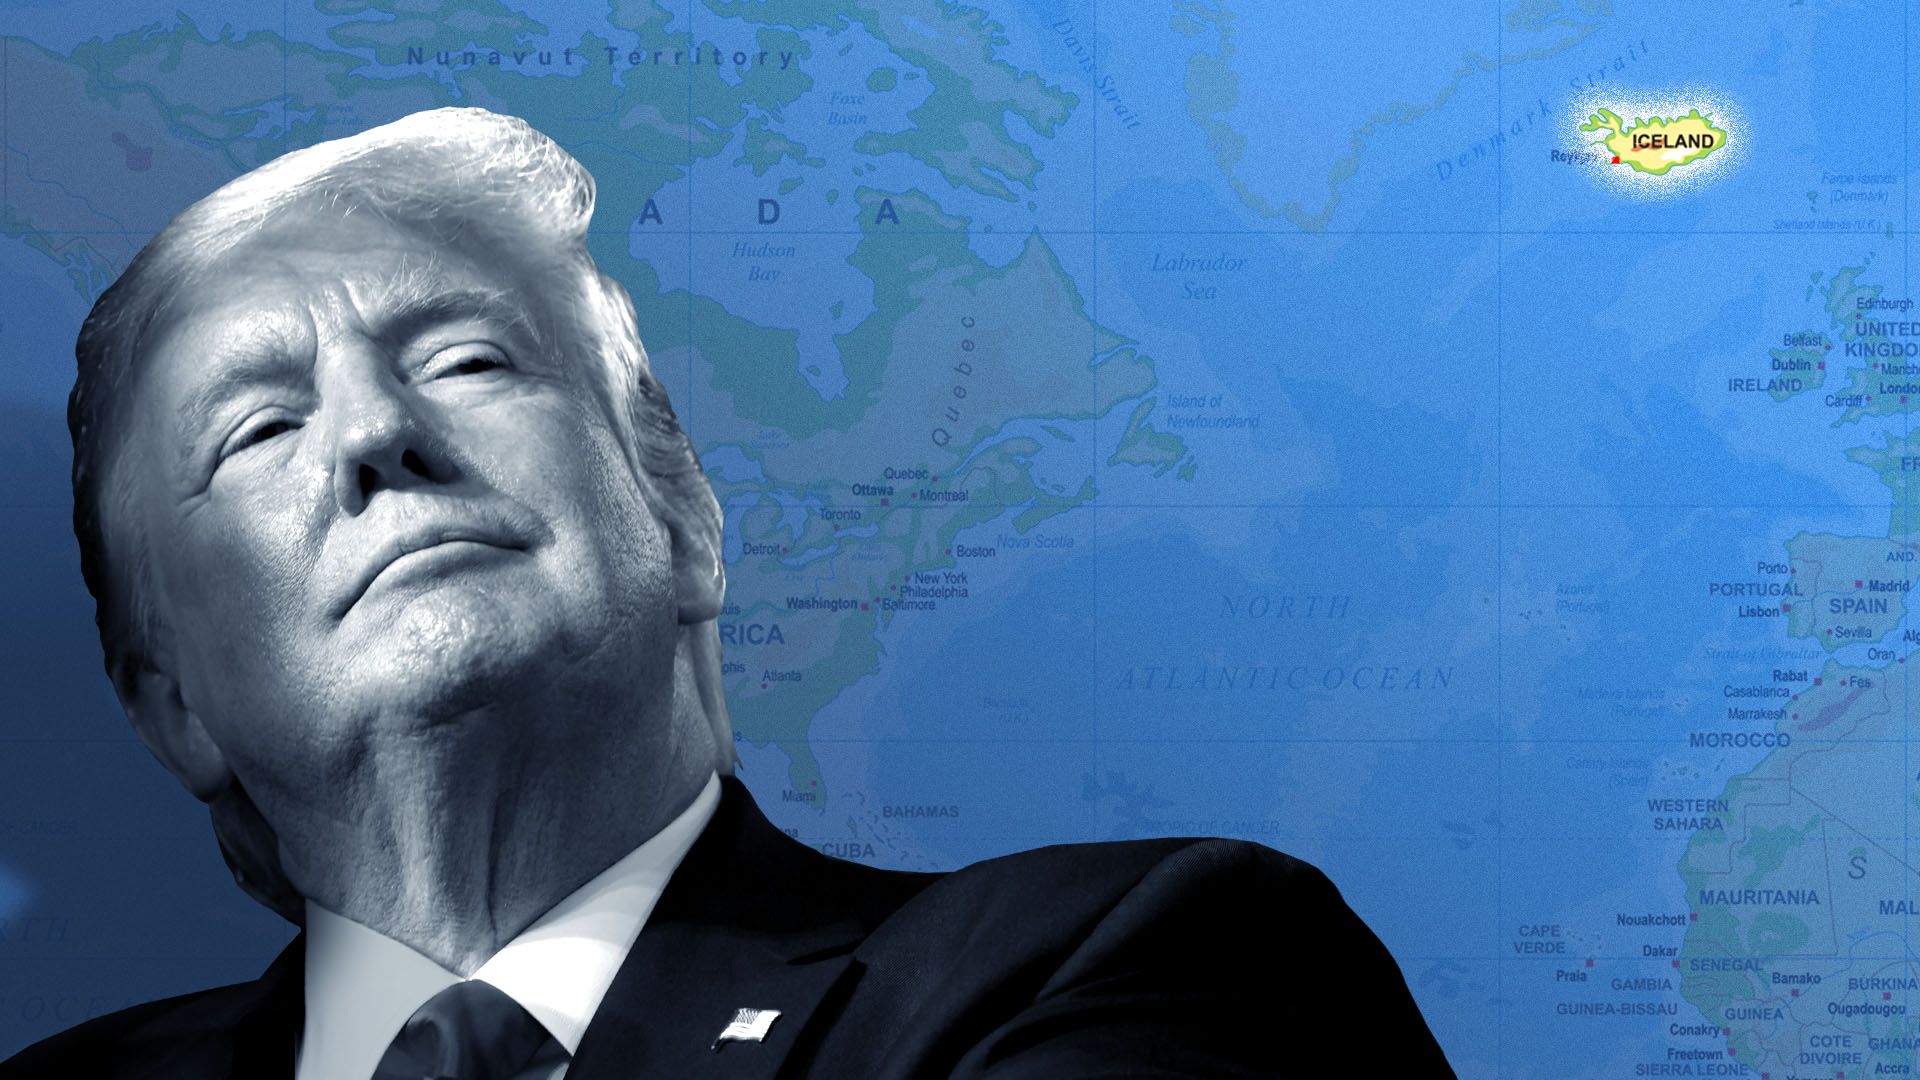 Illustration of President Trump looking at a world map with Iceland highlighted